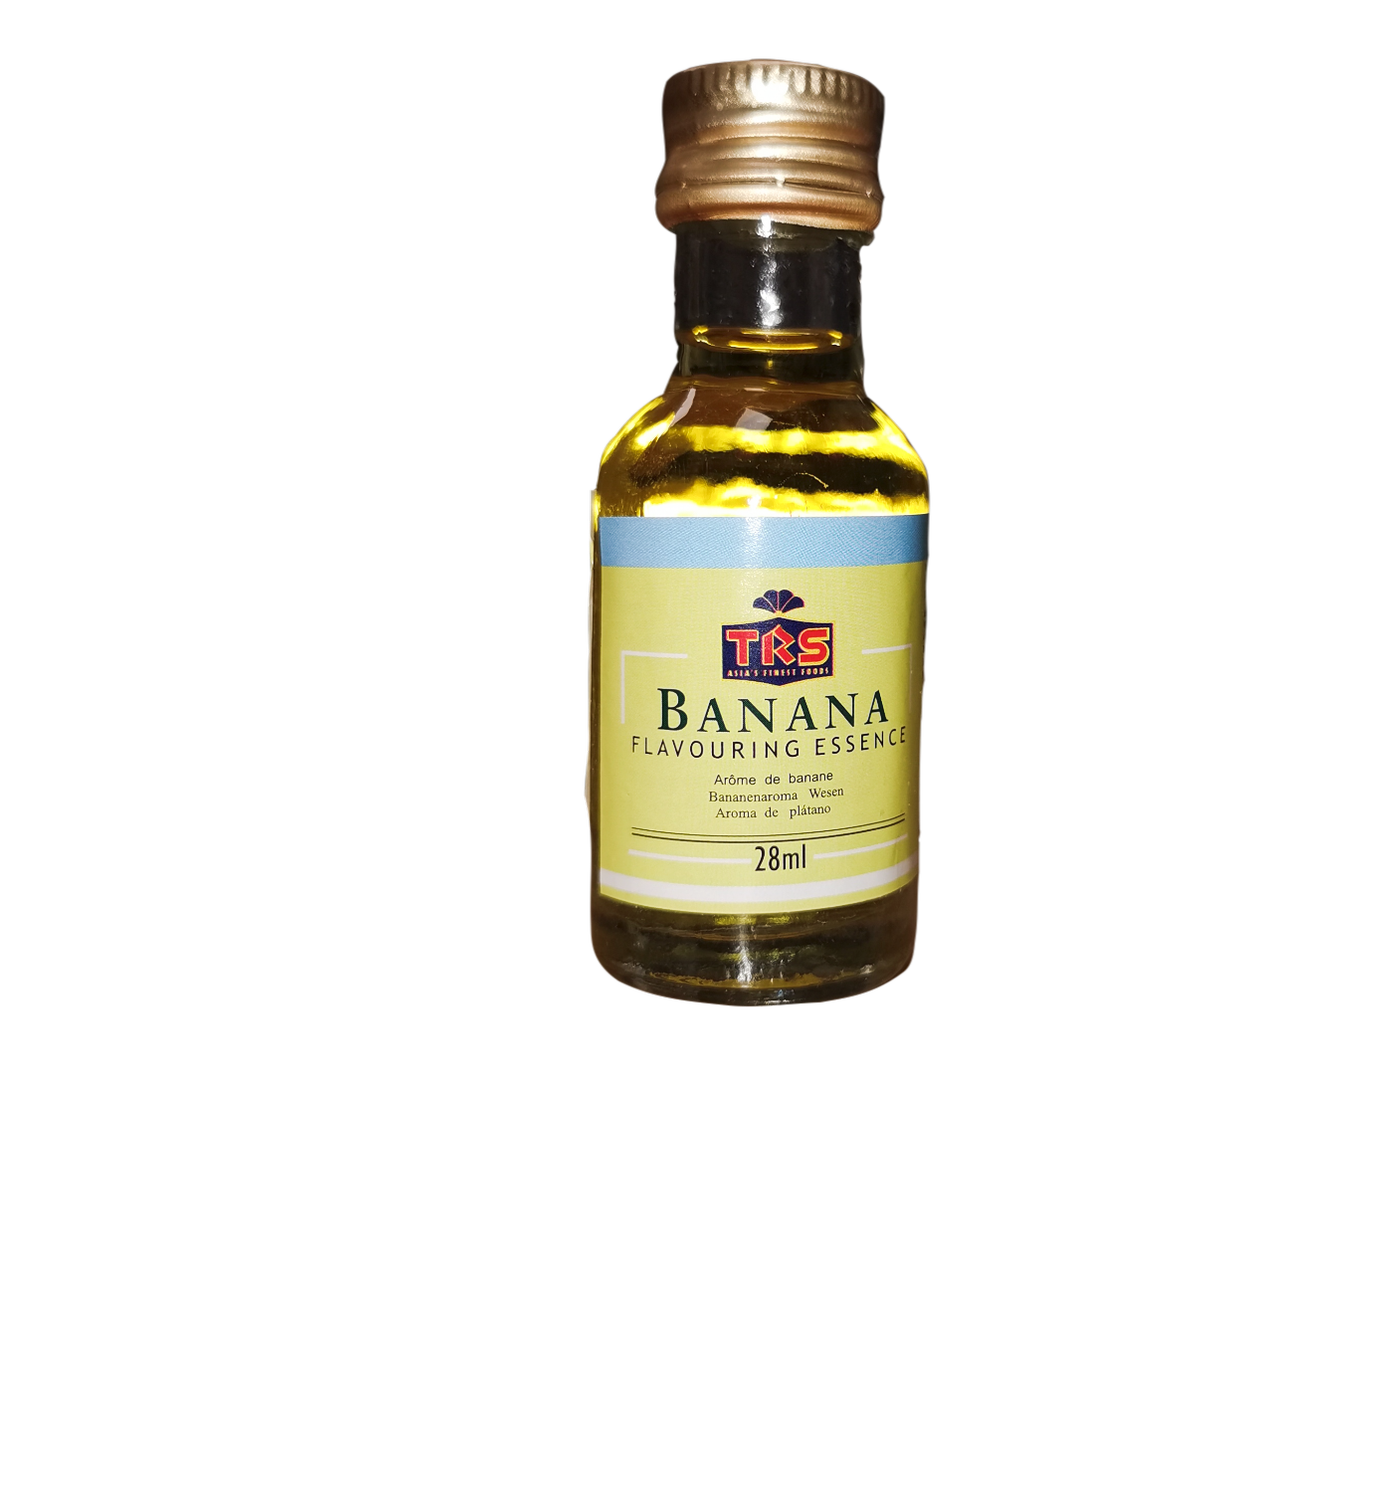 TRS Banana Flavouring Essence